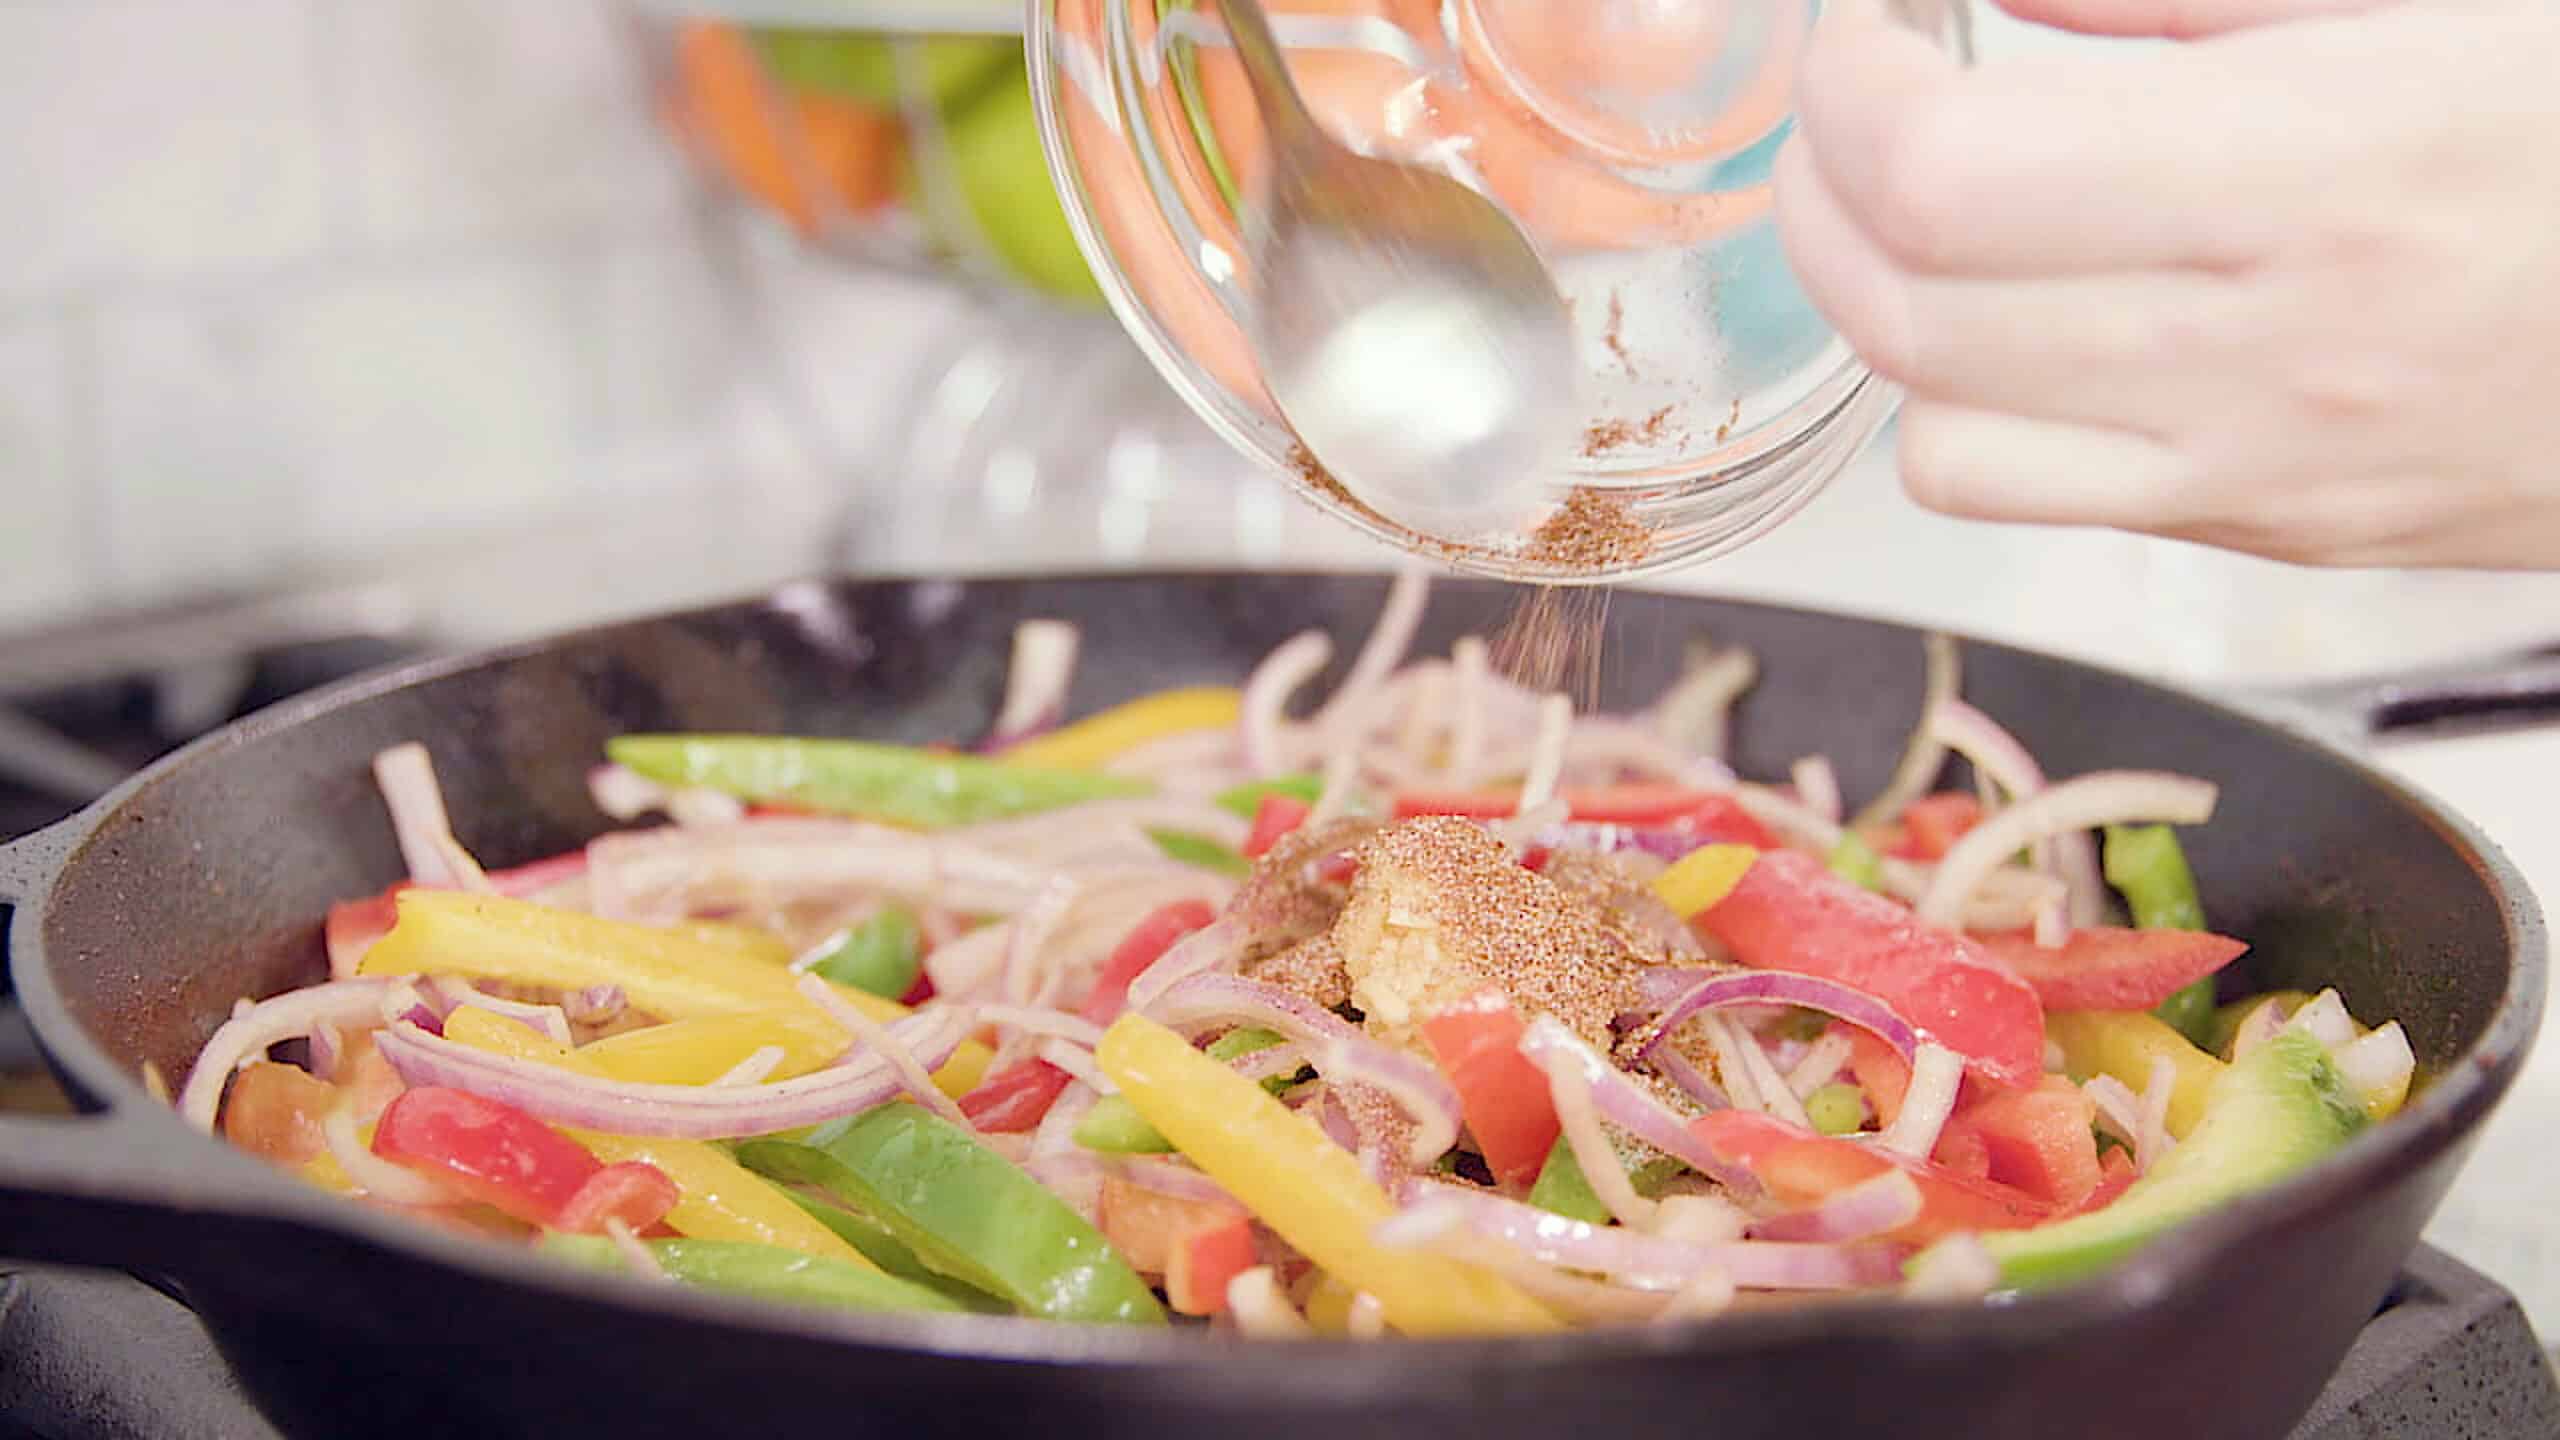 Close-up view of a cast iron skillet filled with sliced red onion and sliced red, yellow, and green peppers topped with minced garlic and various spices poured from a small clear glass mixing bowl scooped out using a metal spoon.